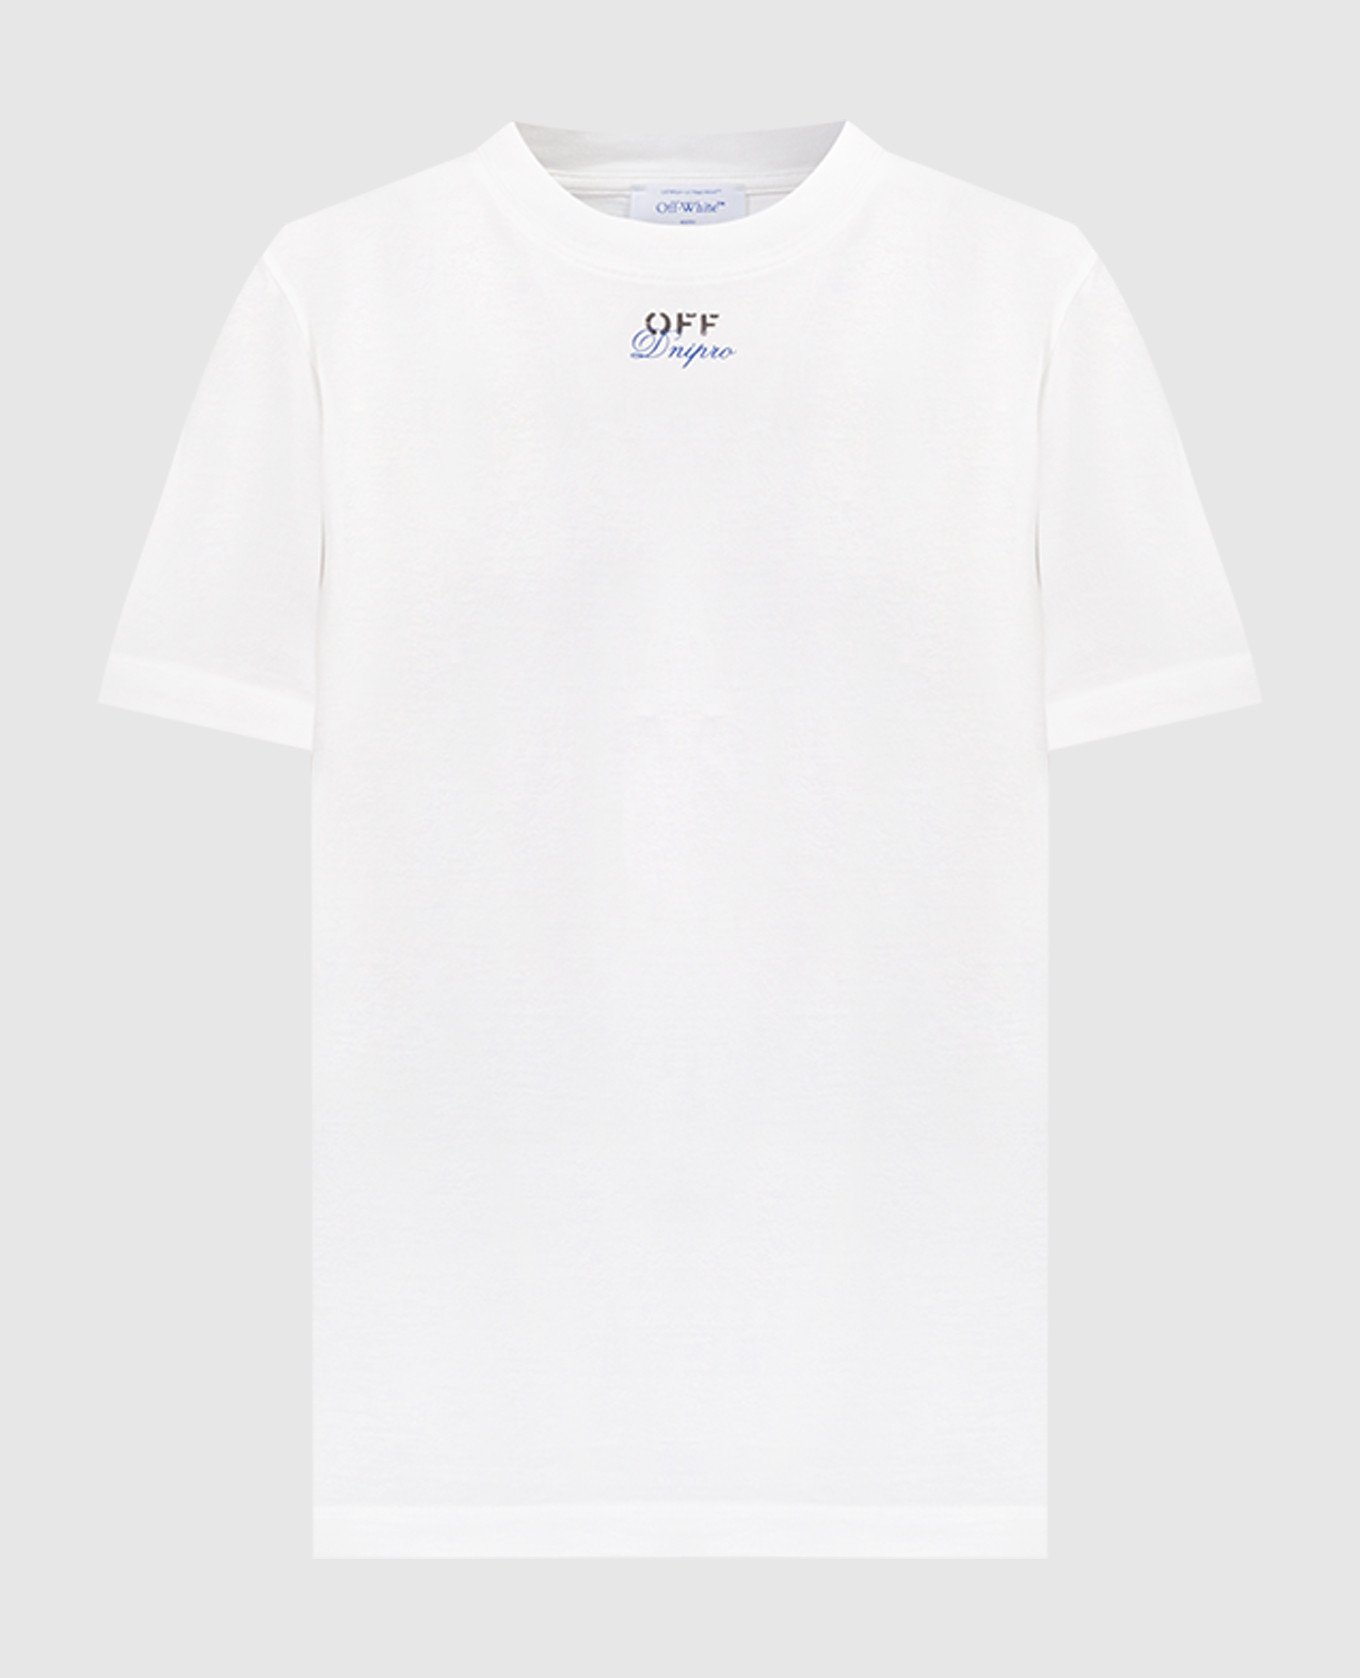 White t-shirt with Off-White Dnipro print